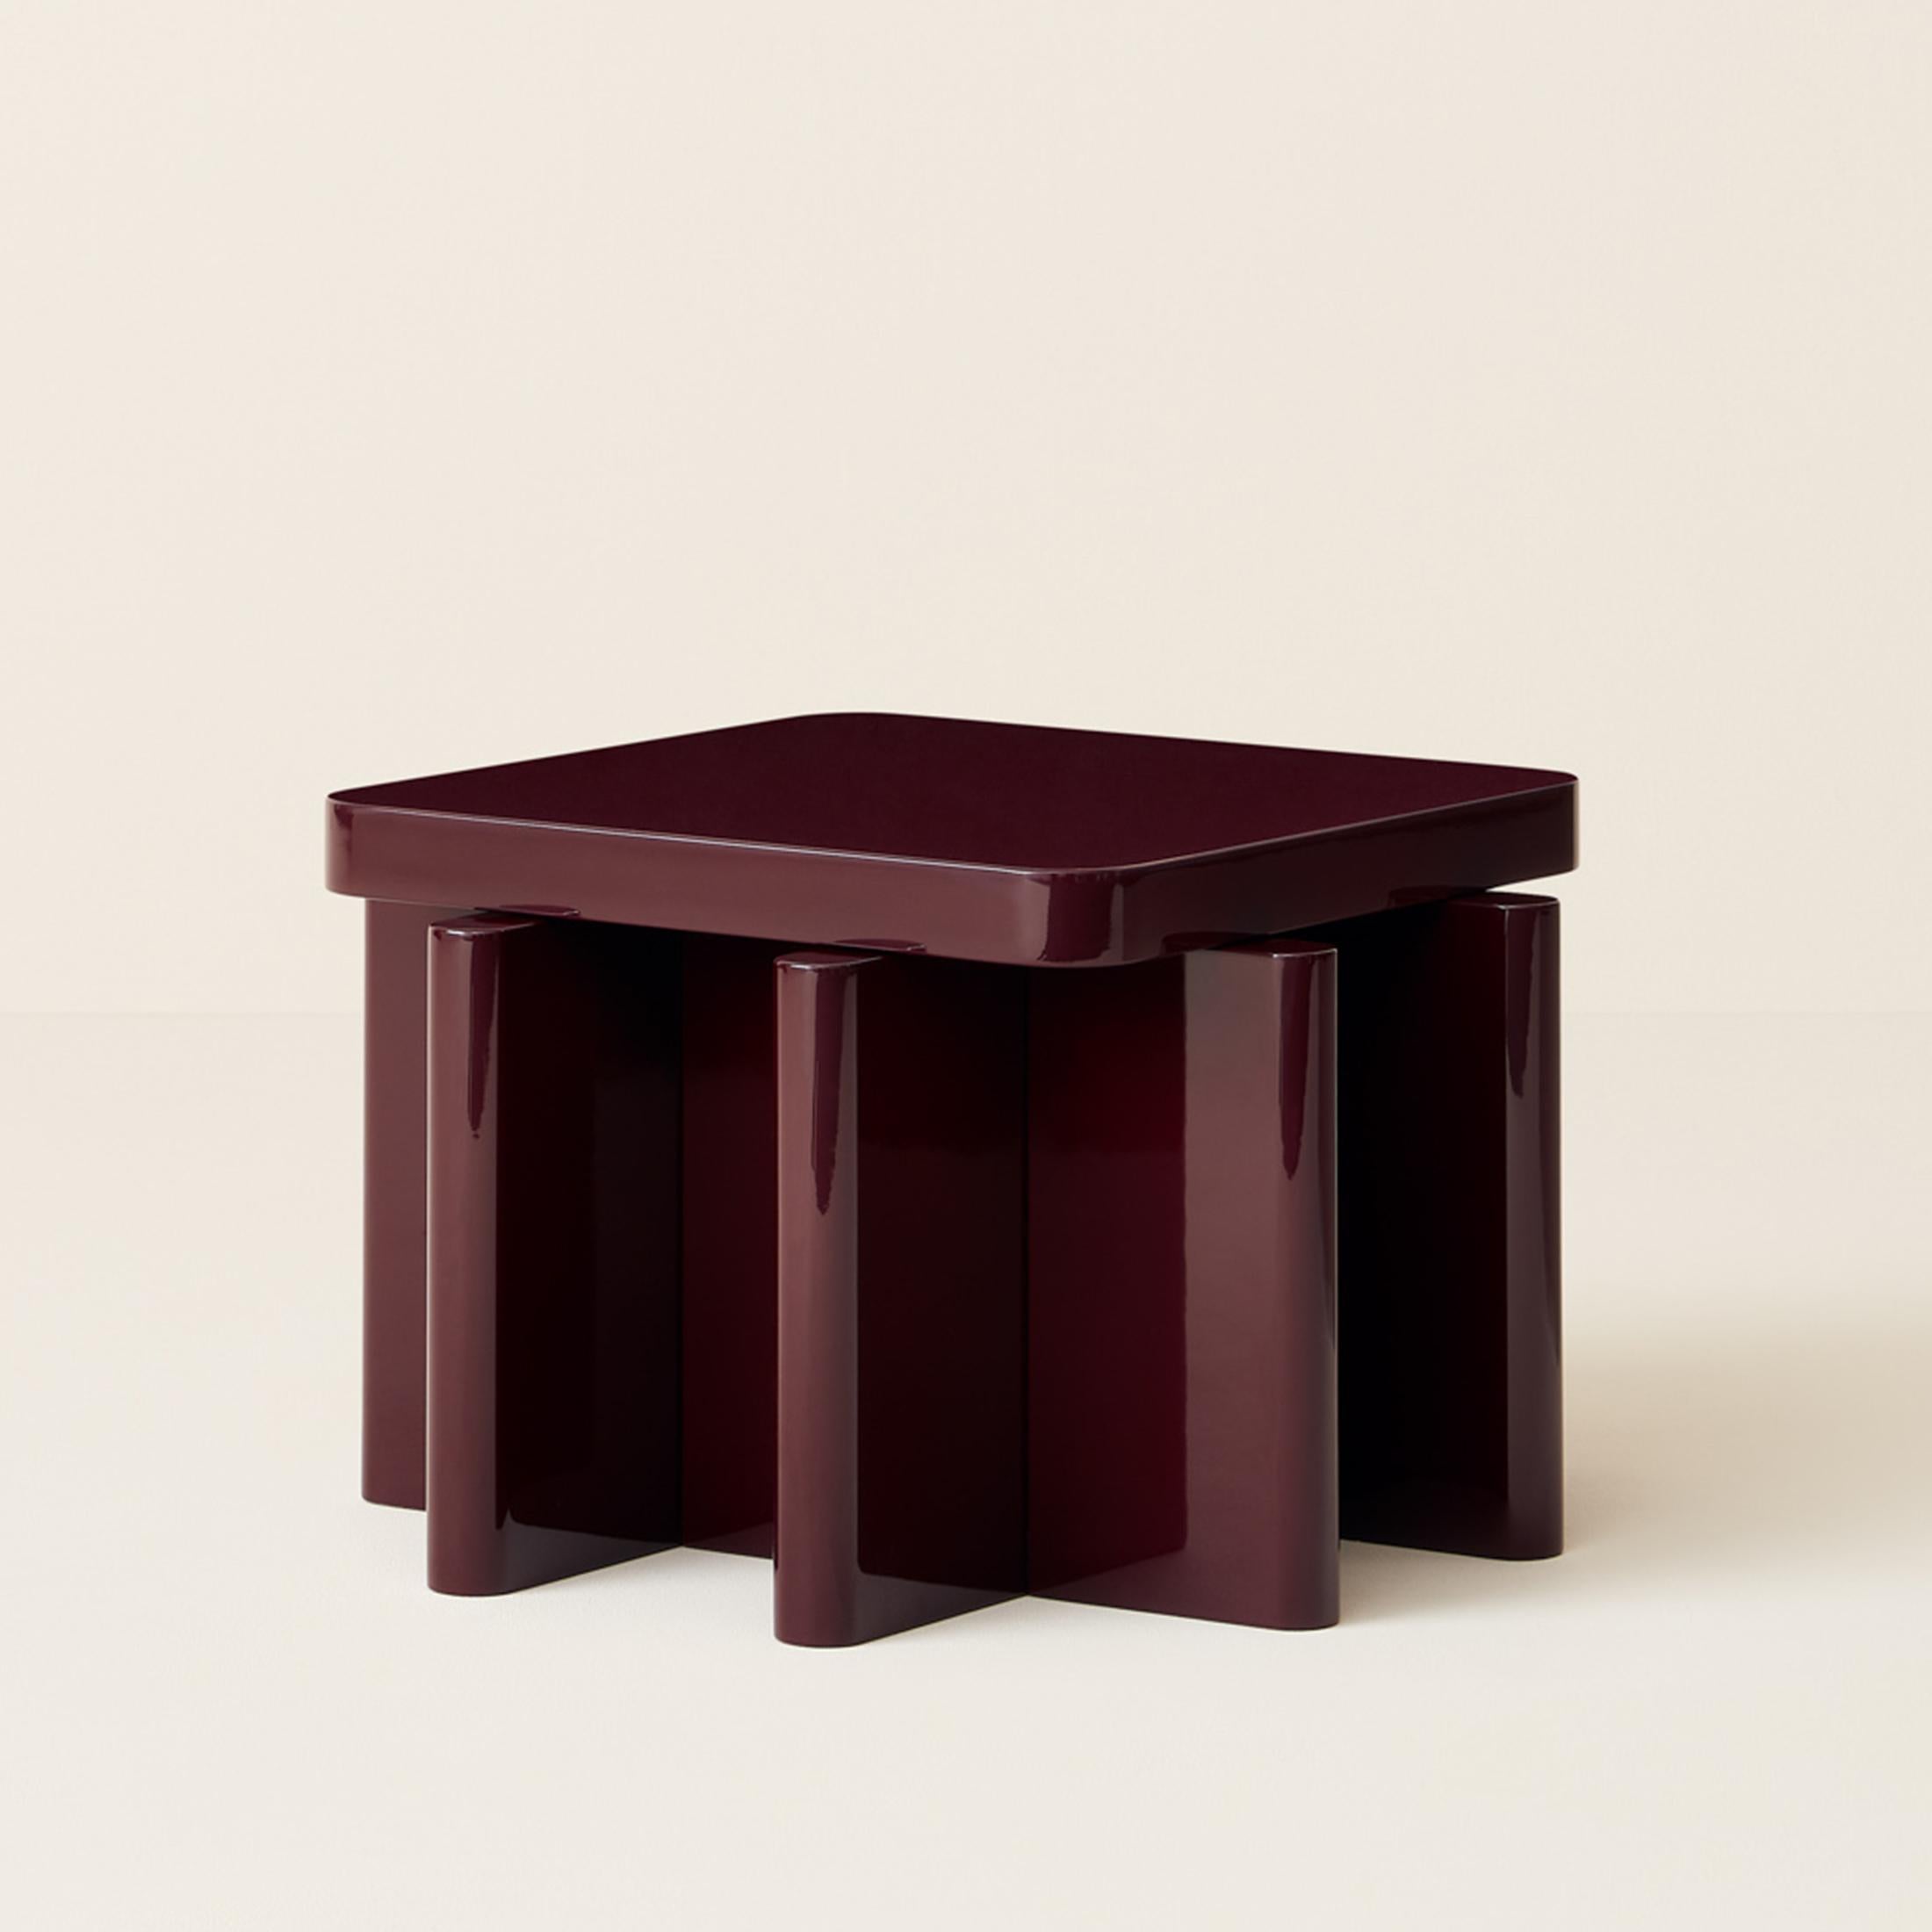 Spina Table in Lac Wood Bordeaux 2+2 Edit by Portego For Sale 1